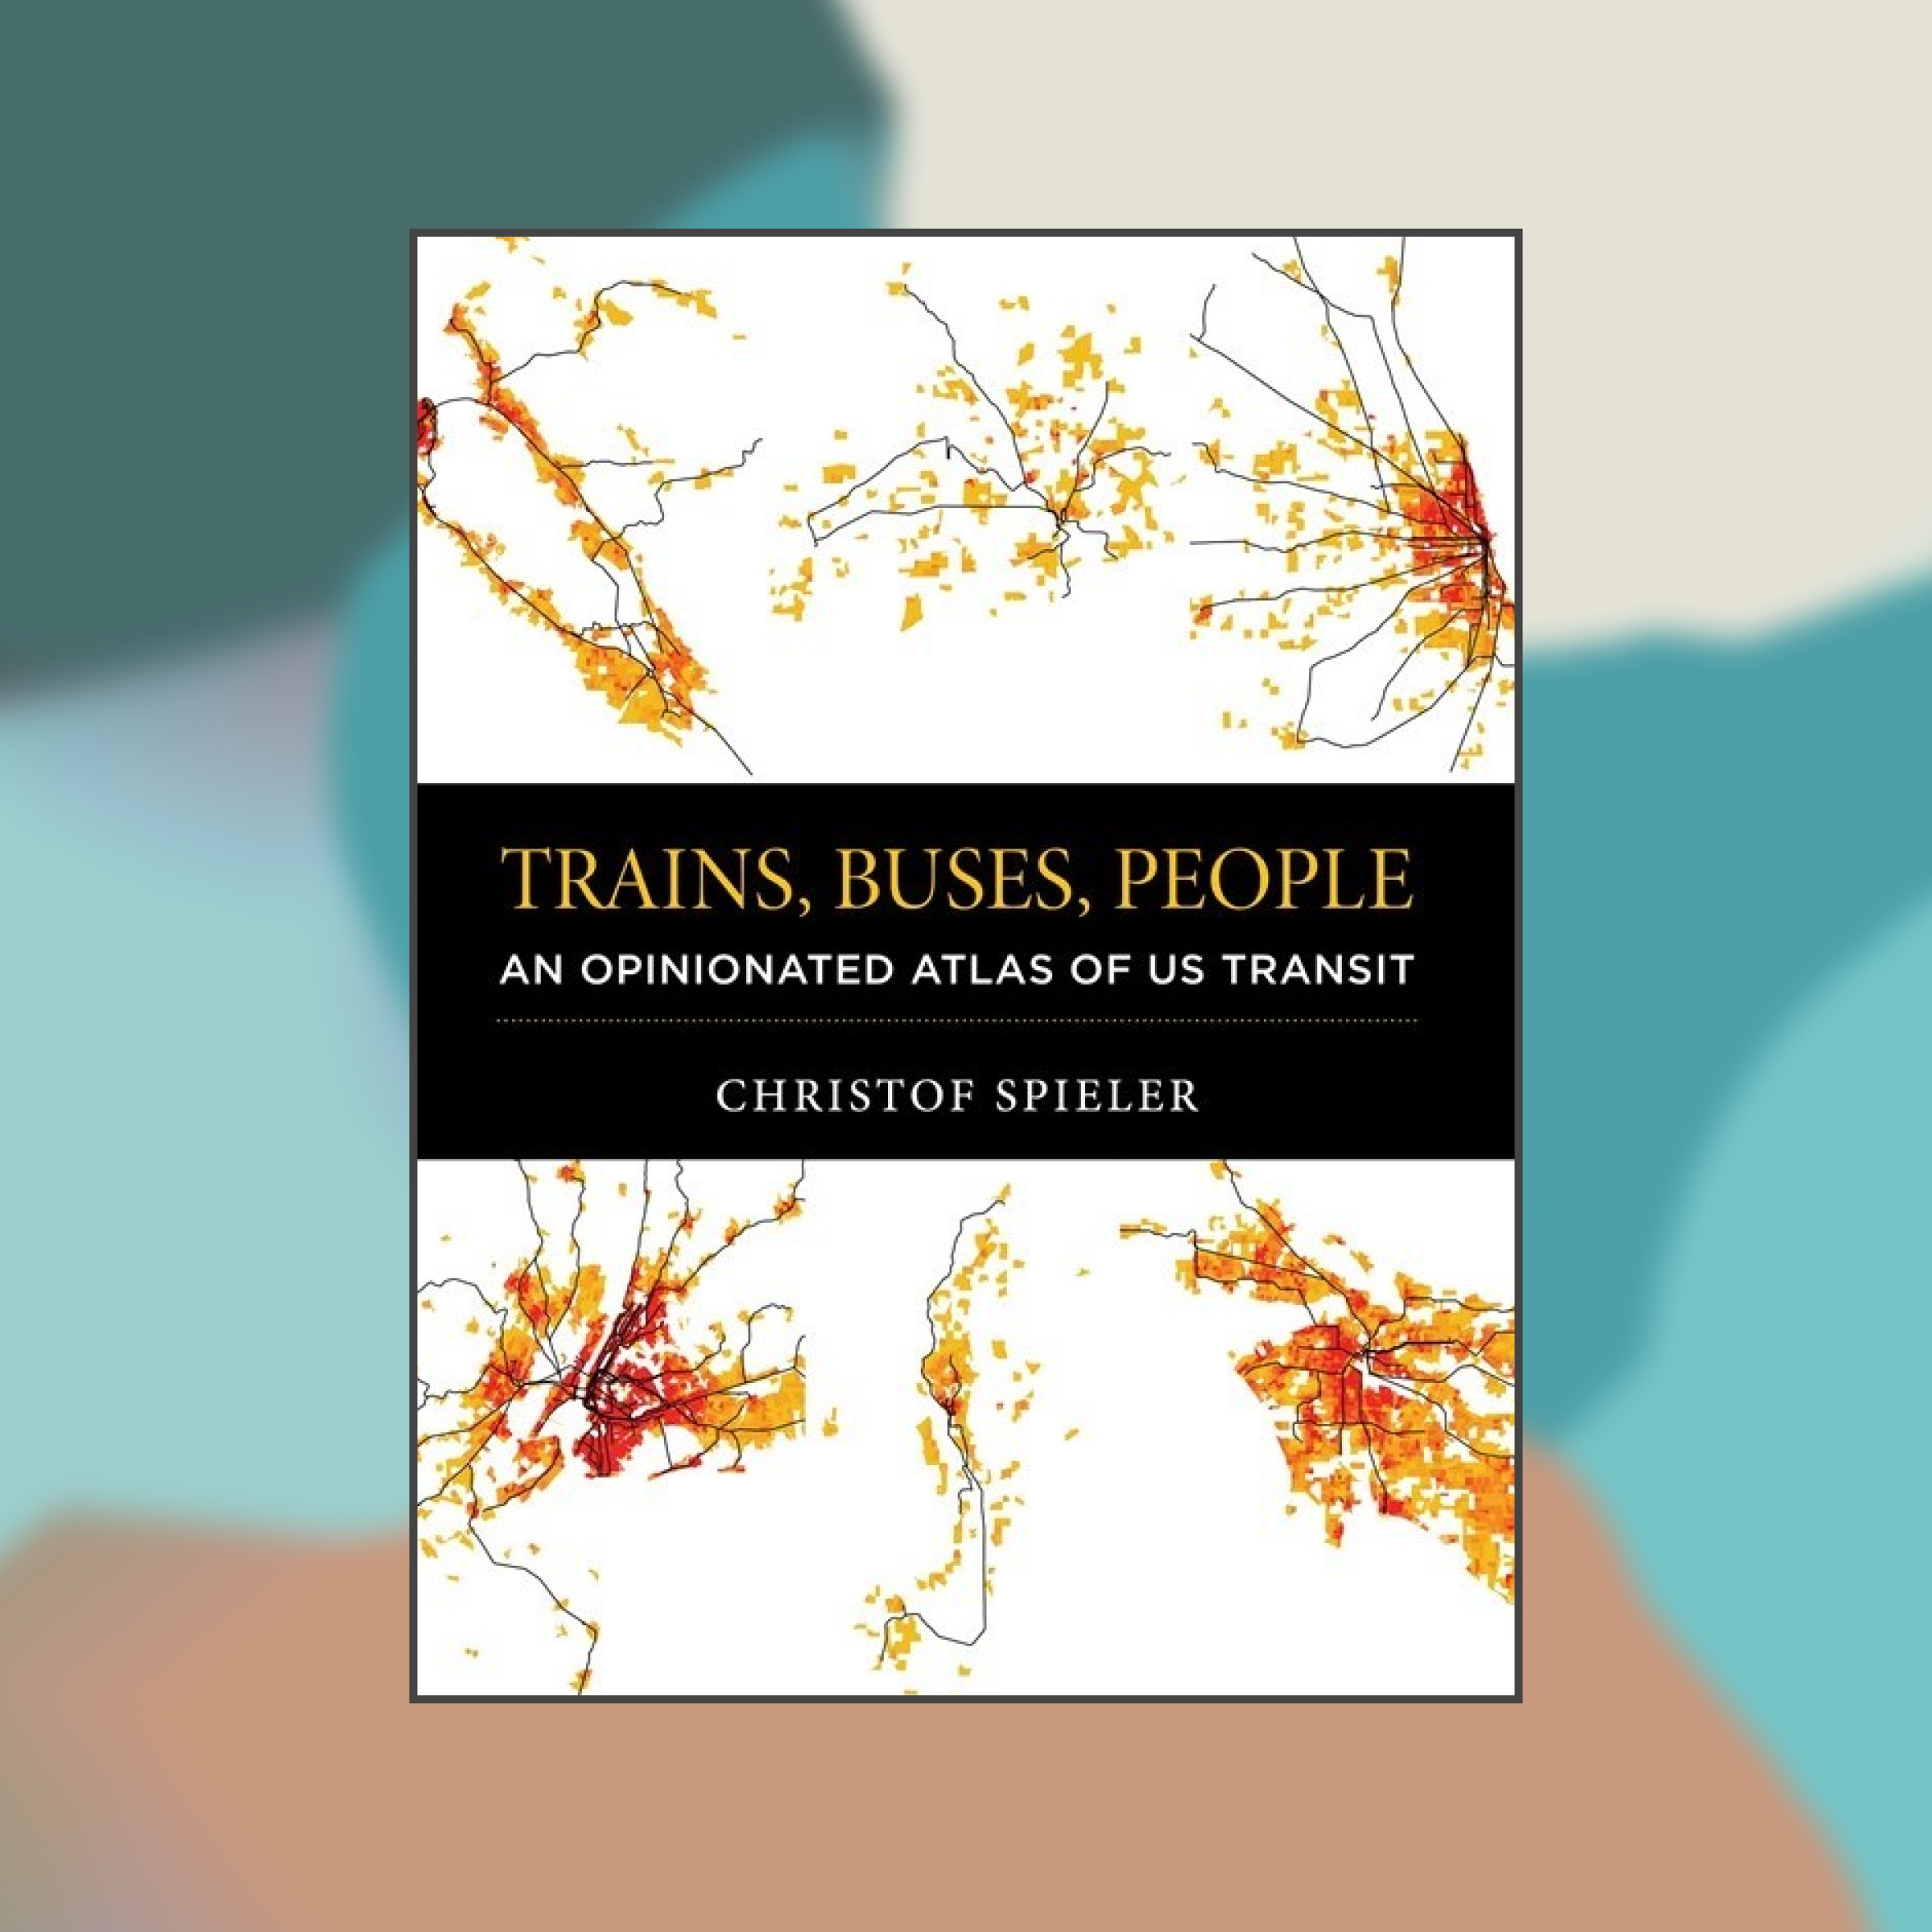 Book cover of Trains Buses People against an abstract painted background